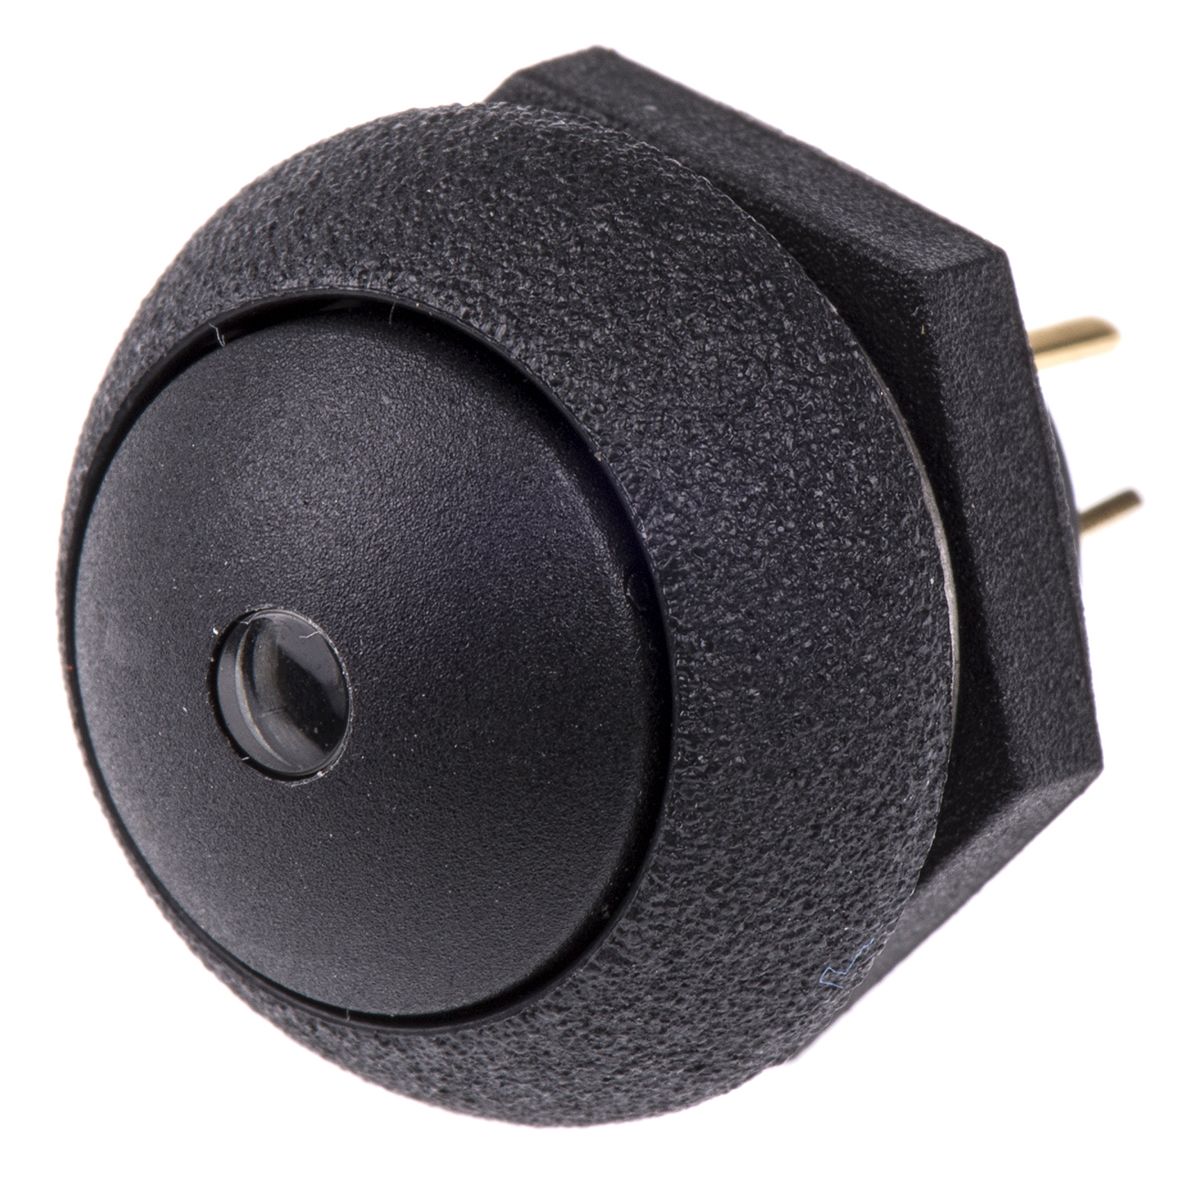 Otto Illuminated Momentary Push Button Switch, Panel Mount, SPDT, Green LED, 28V dc, IP68S